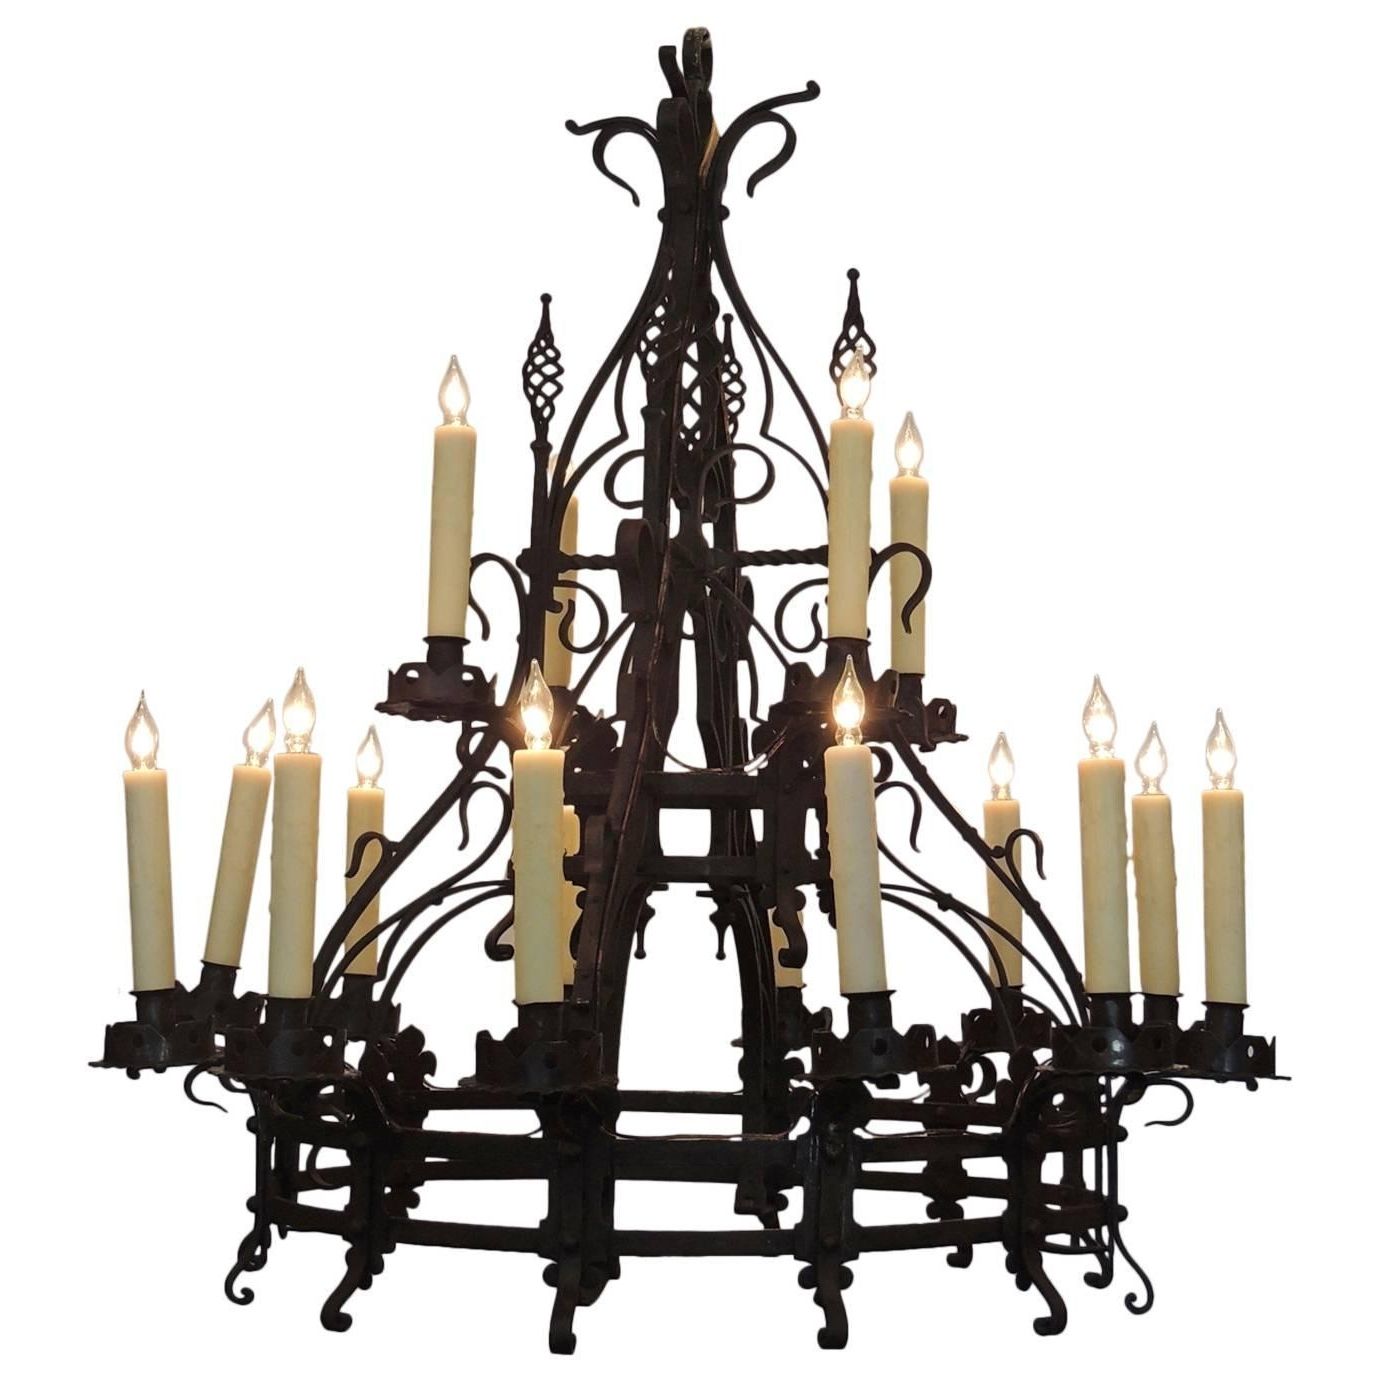 Late 19th C French Gothic Wrought Iron Chandelier For Sale At 1stdibs Pertaining To Well Known Iron Chandelier (View 10 of 20)